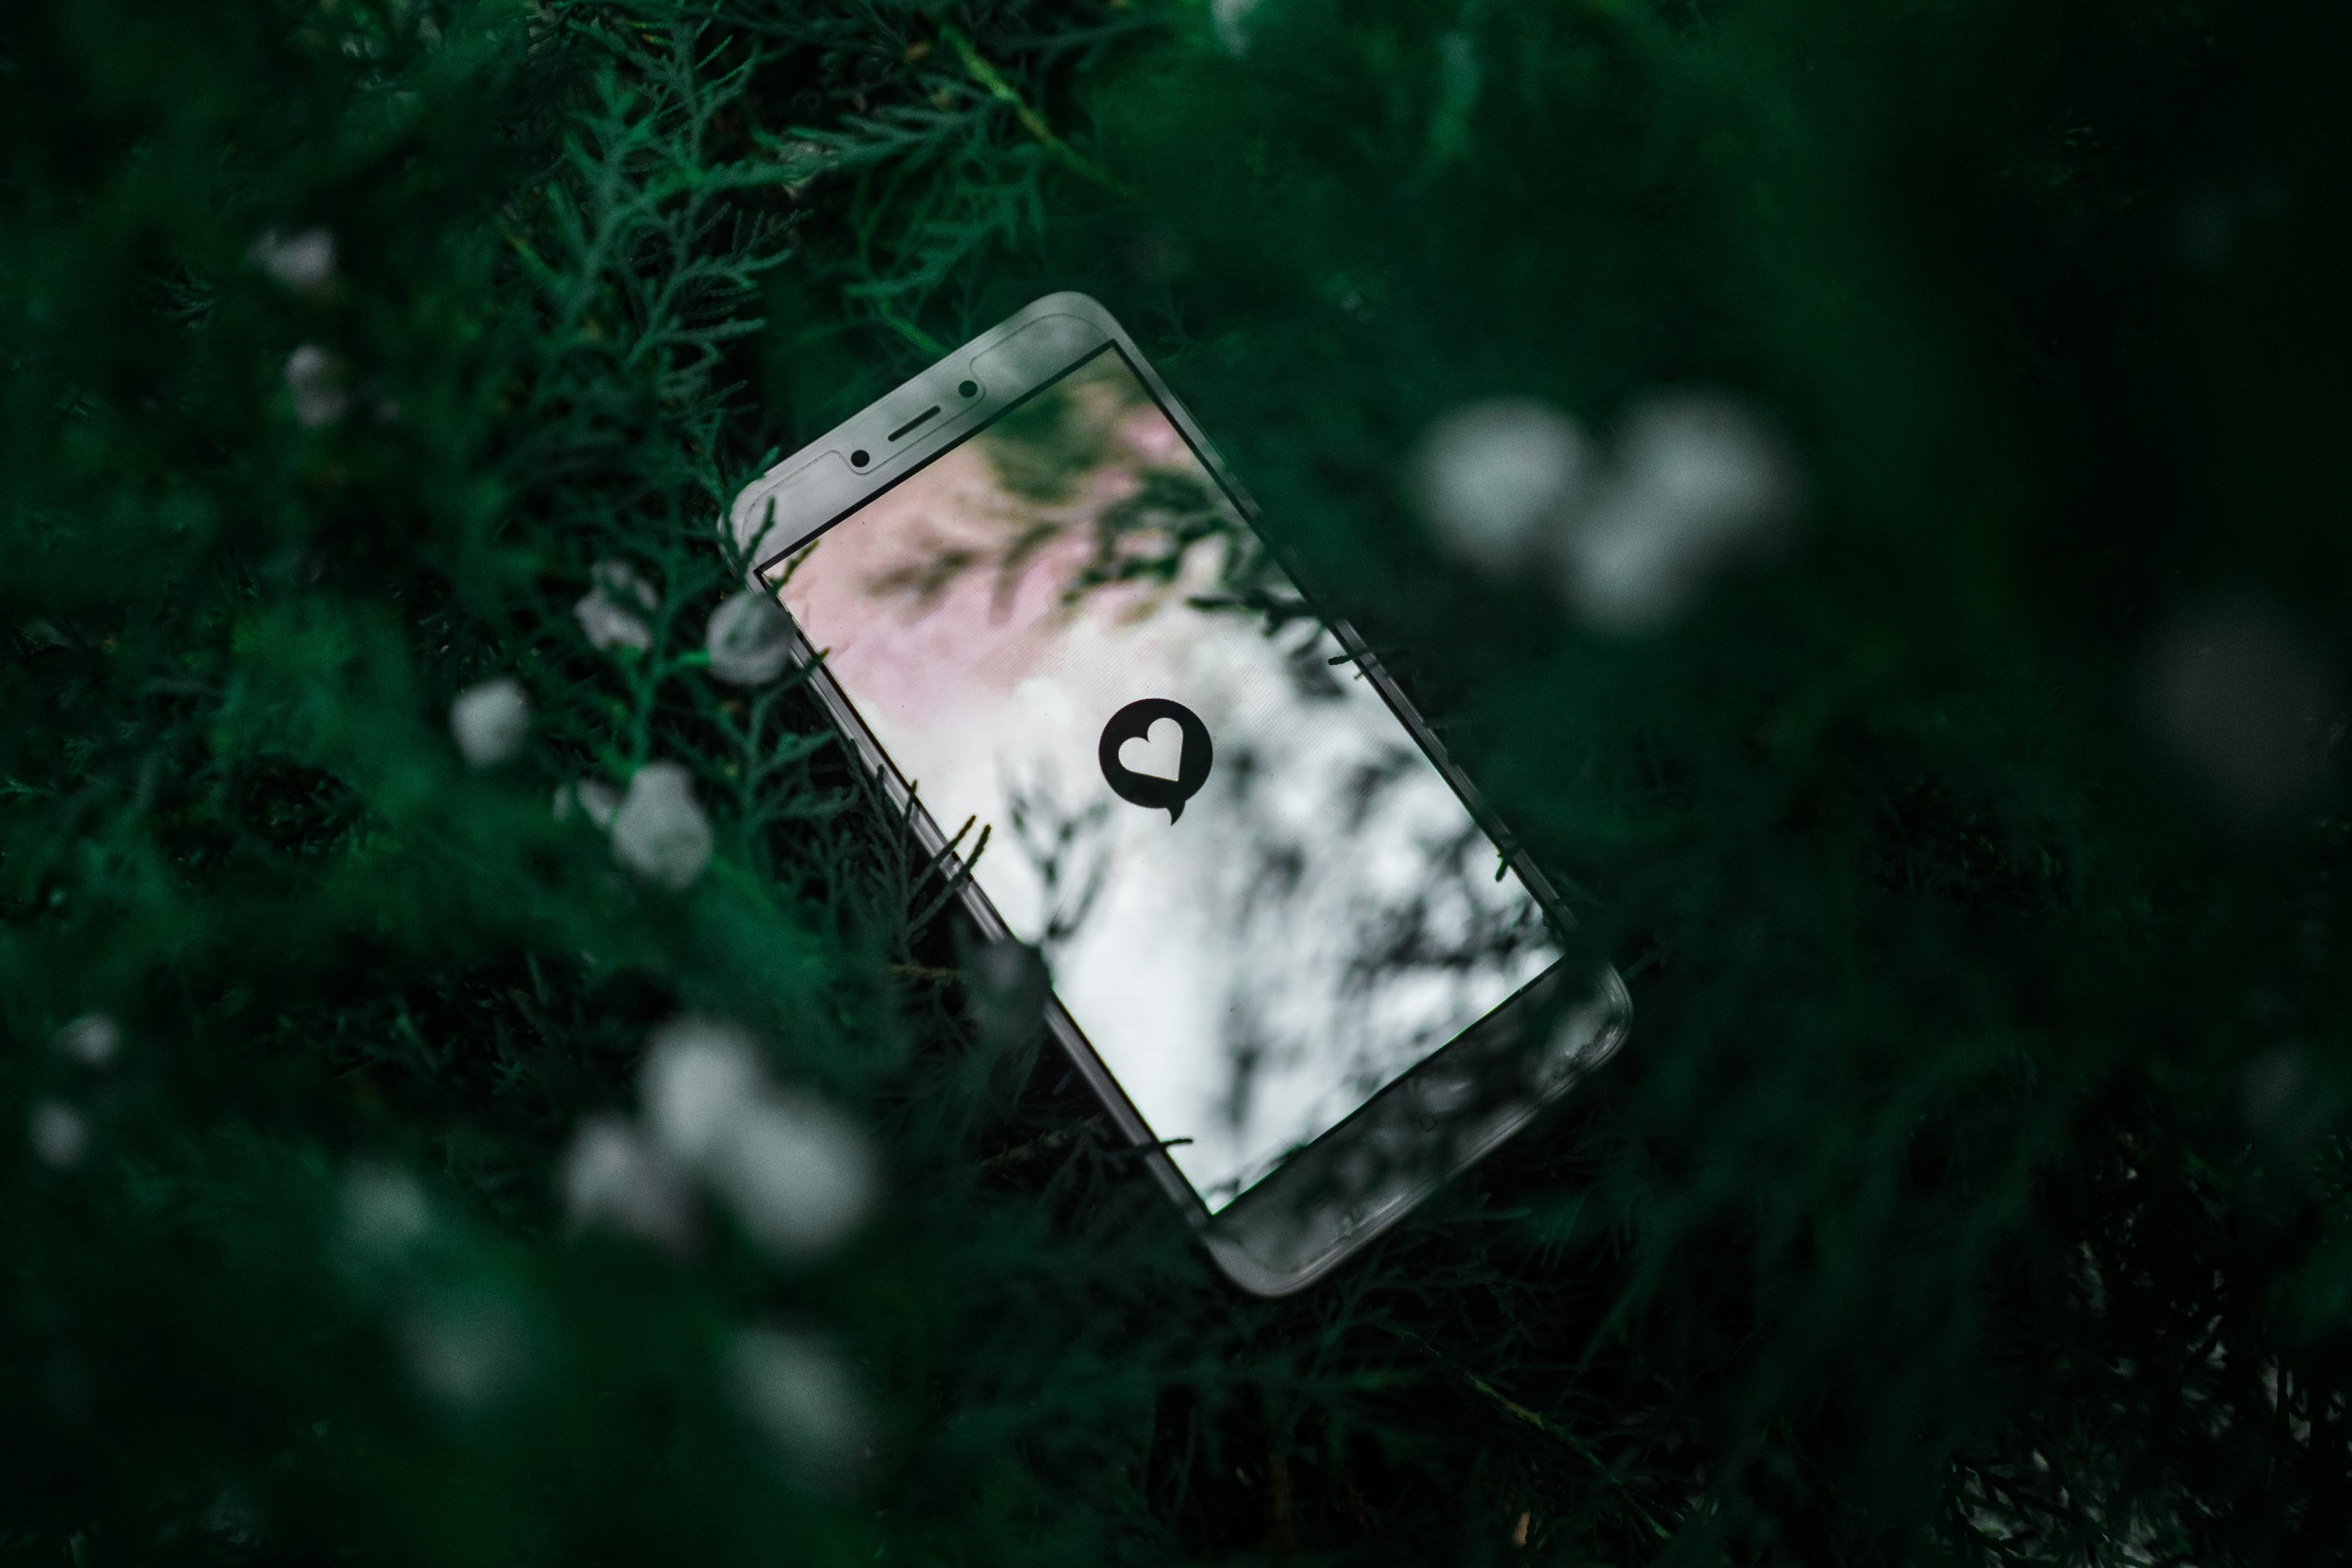 smartphone in plant - screen displays heart icon on white background